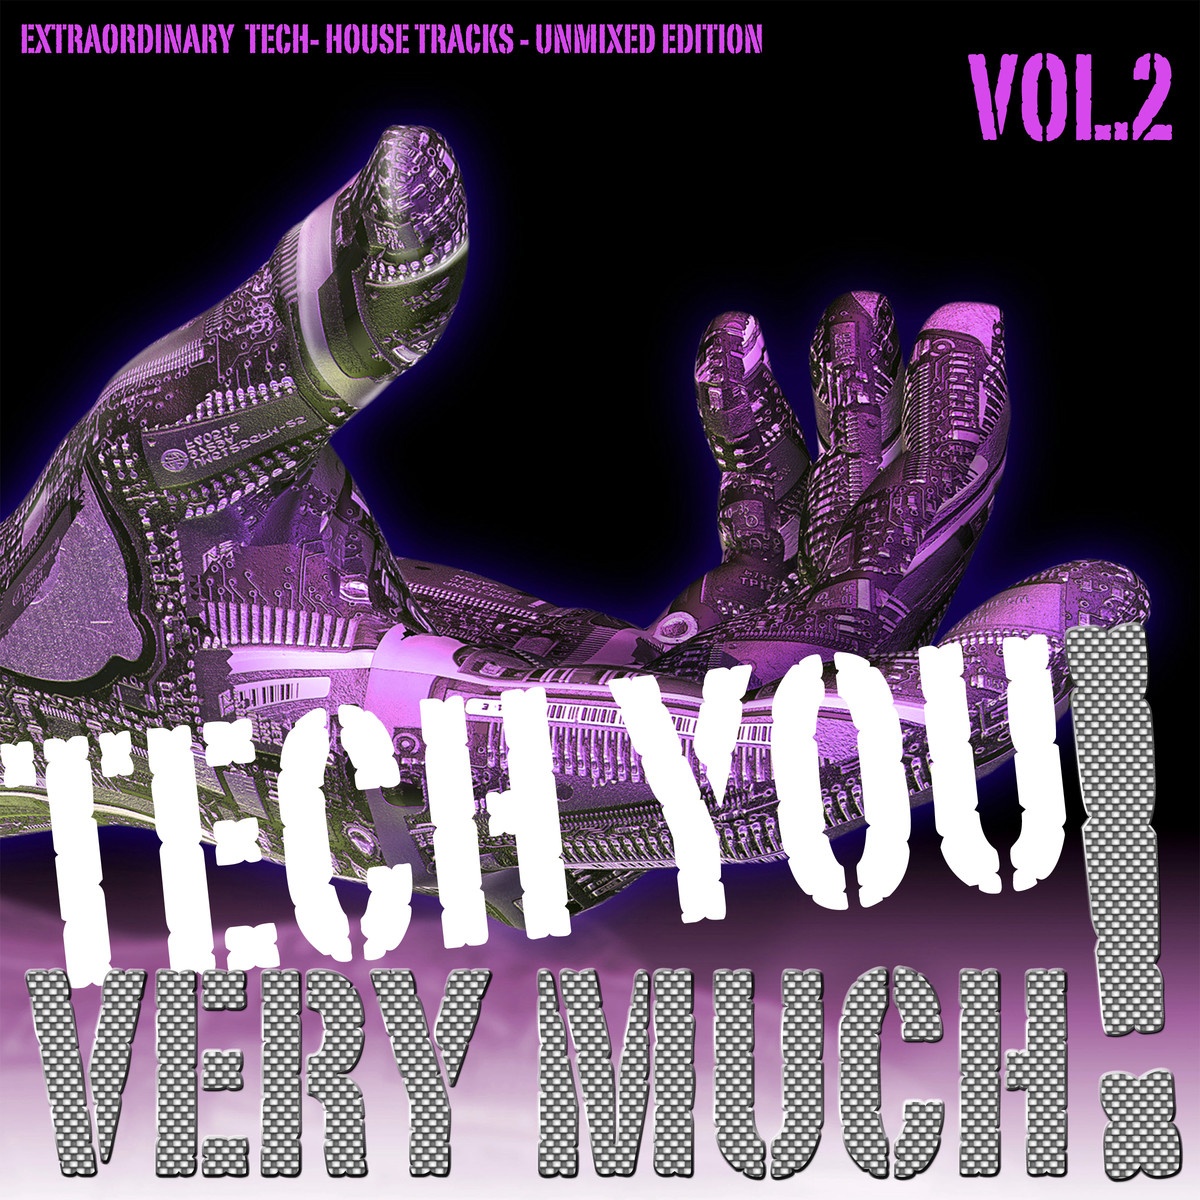 Tech You Very Much!, Vol. 2 (Extraordinary Tech- House Tracks - Unmixed Edition)